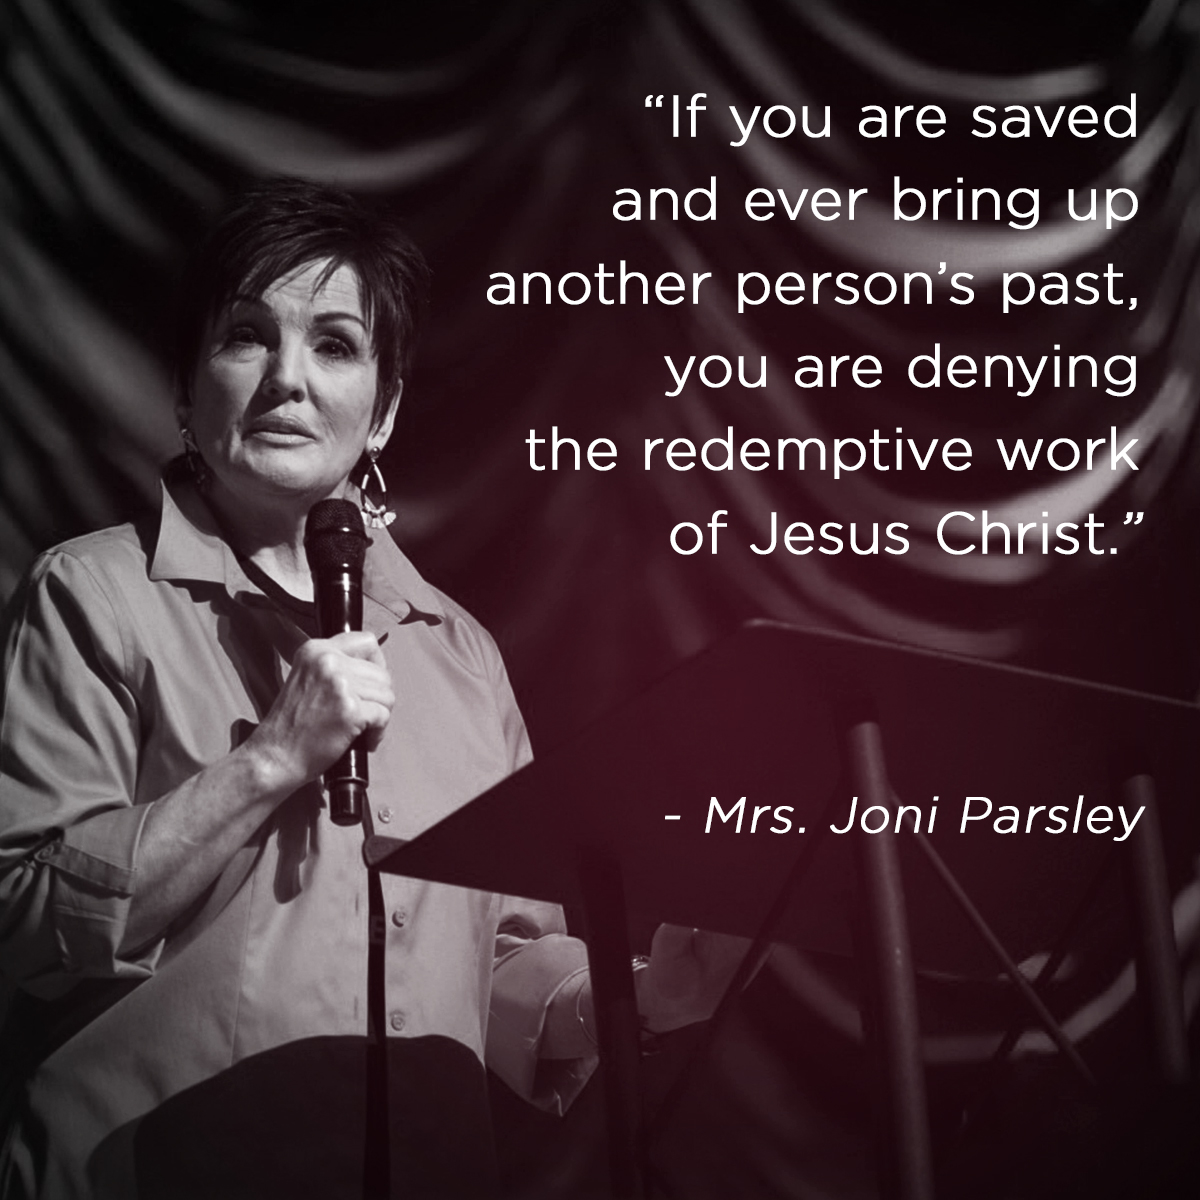 “If you are saved and ever bring up another person’s past, you are denying the redemptive work of Jesus Christ.” – Mrs. Joni Parsley